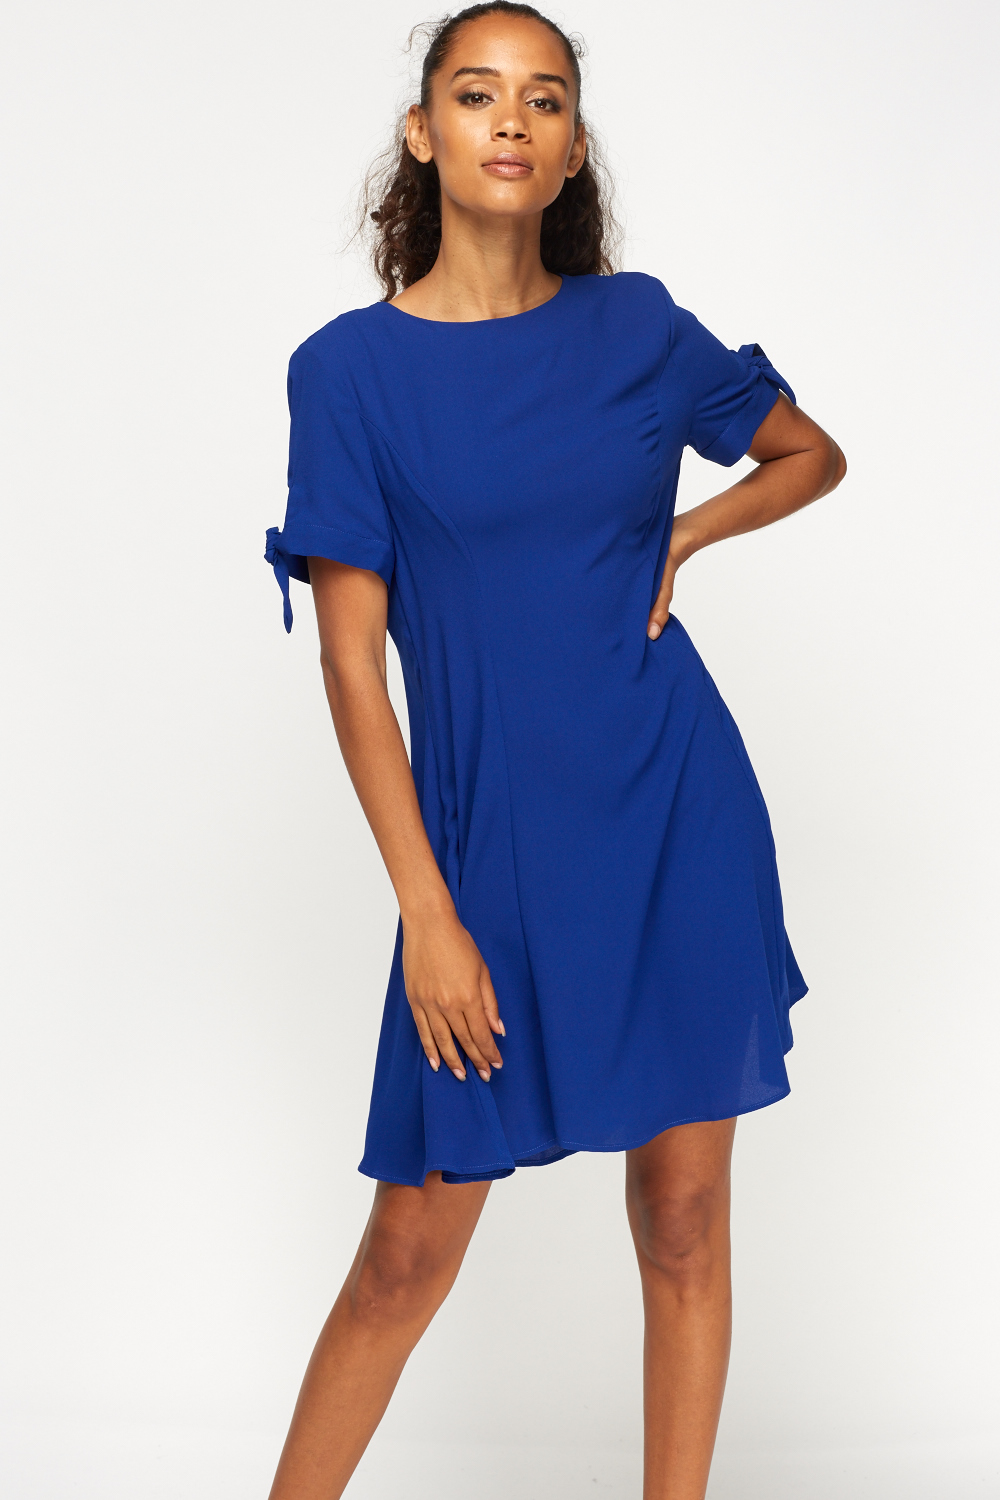 royal blue shift dress with sleeves